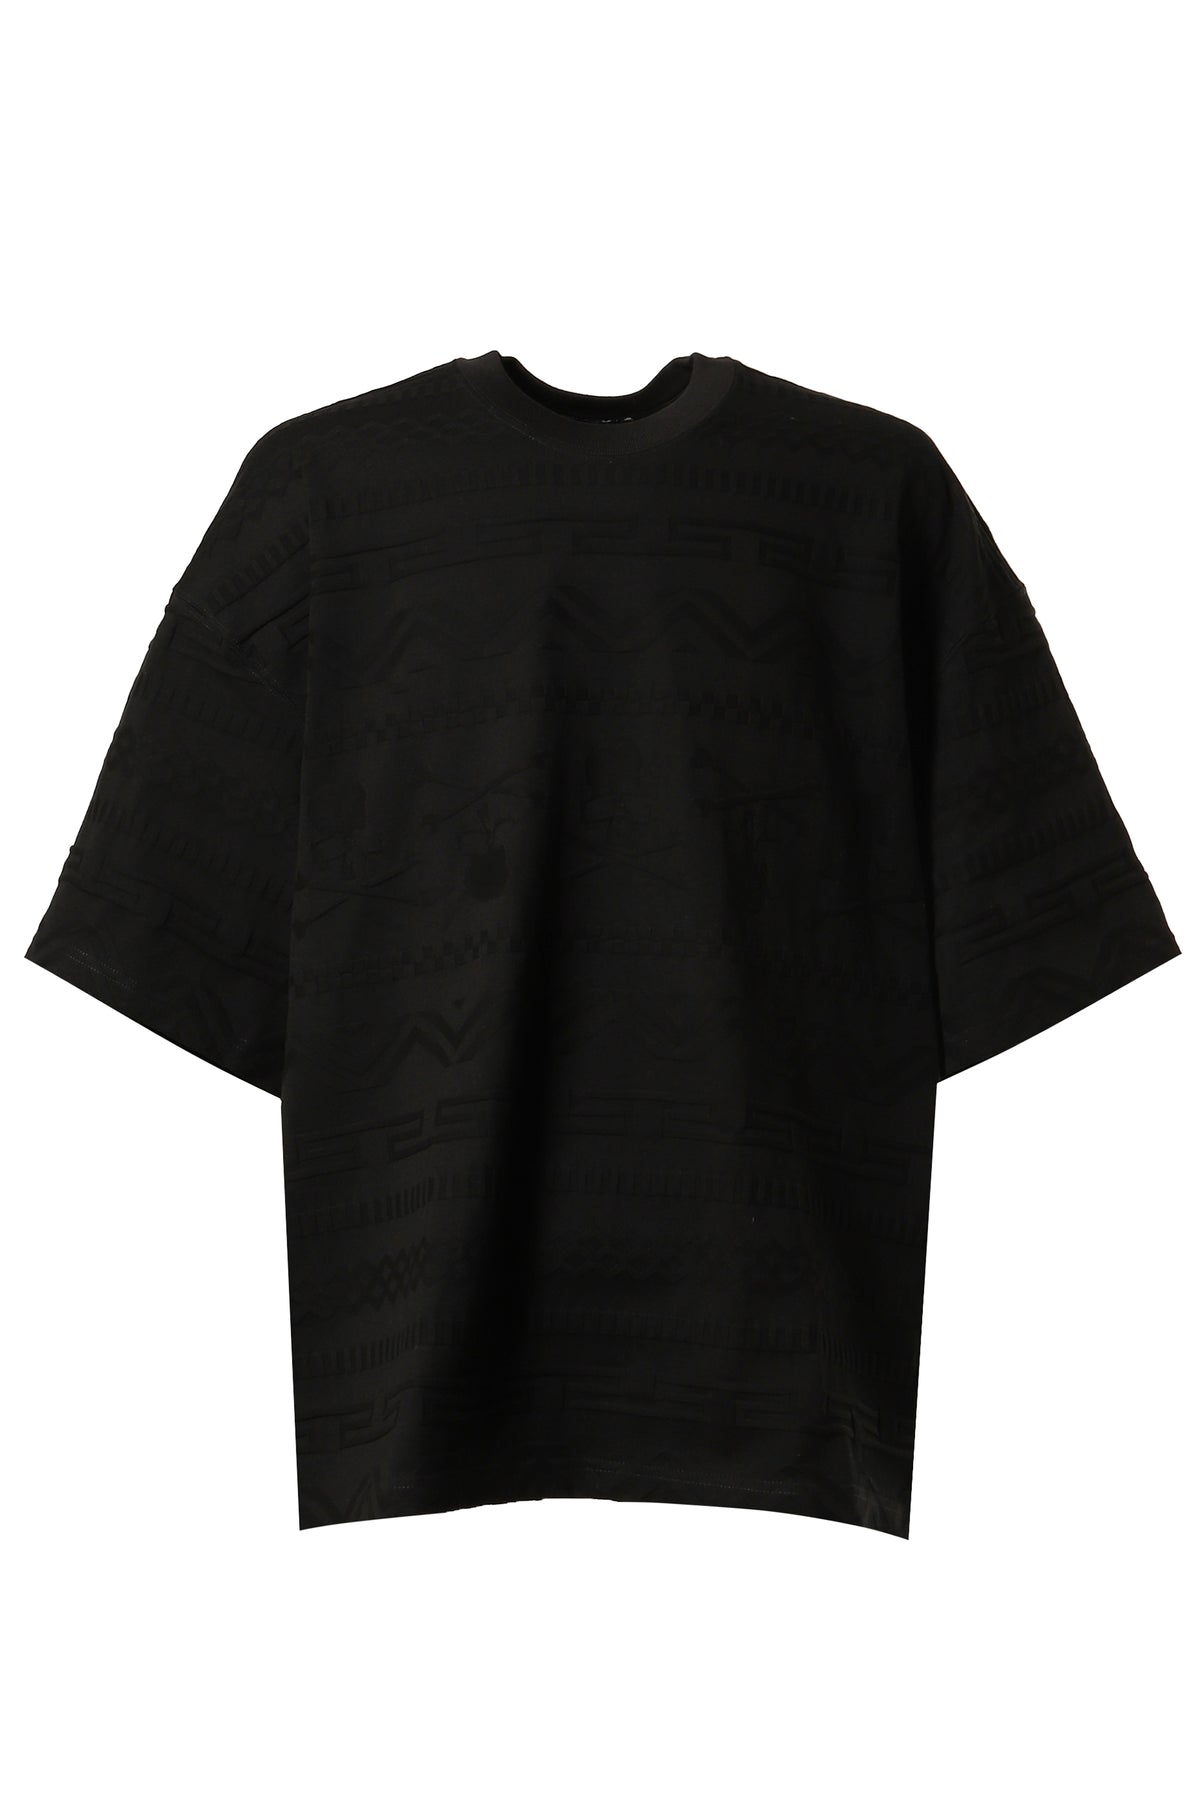 LINKS JACQUARD TEE (BOXY FIT) / BLK